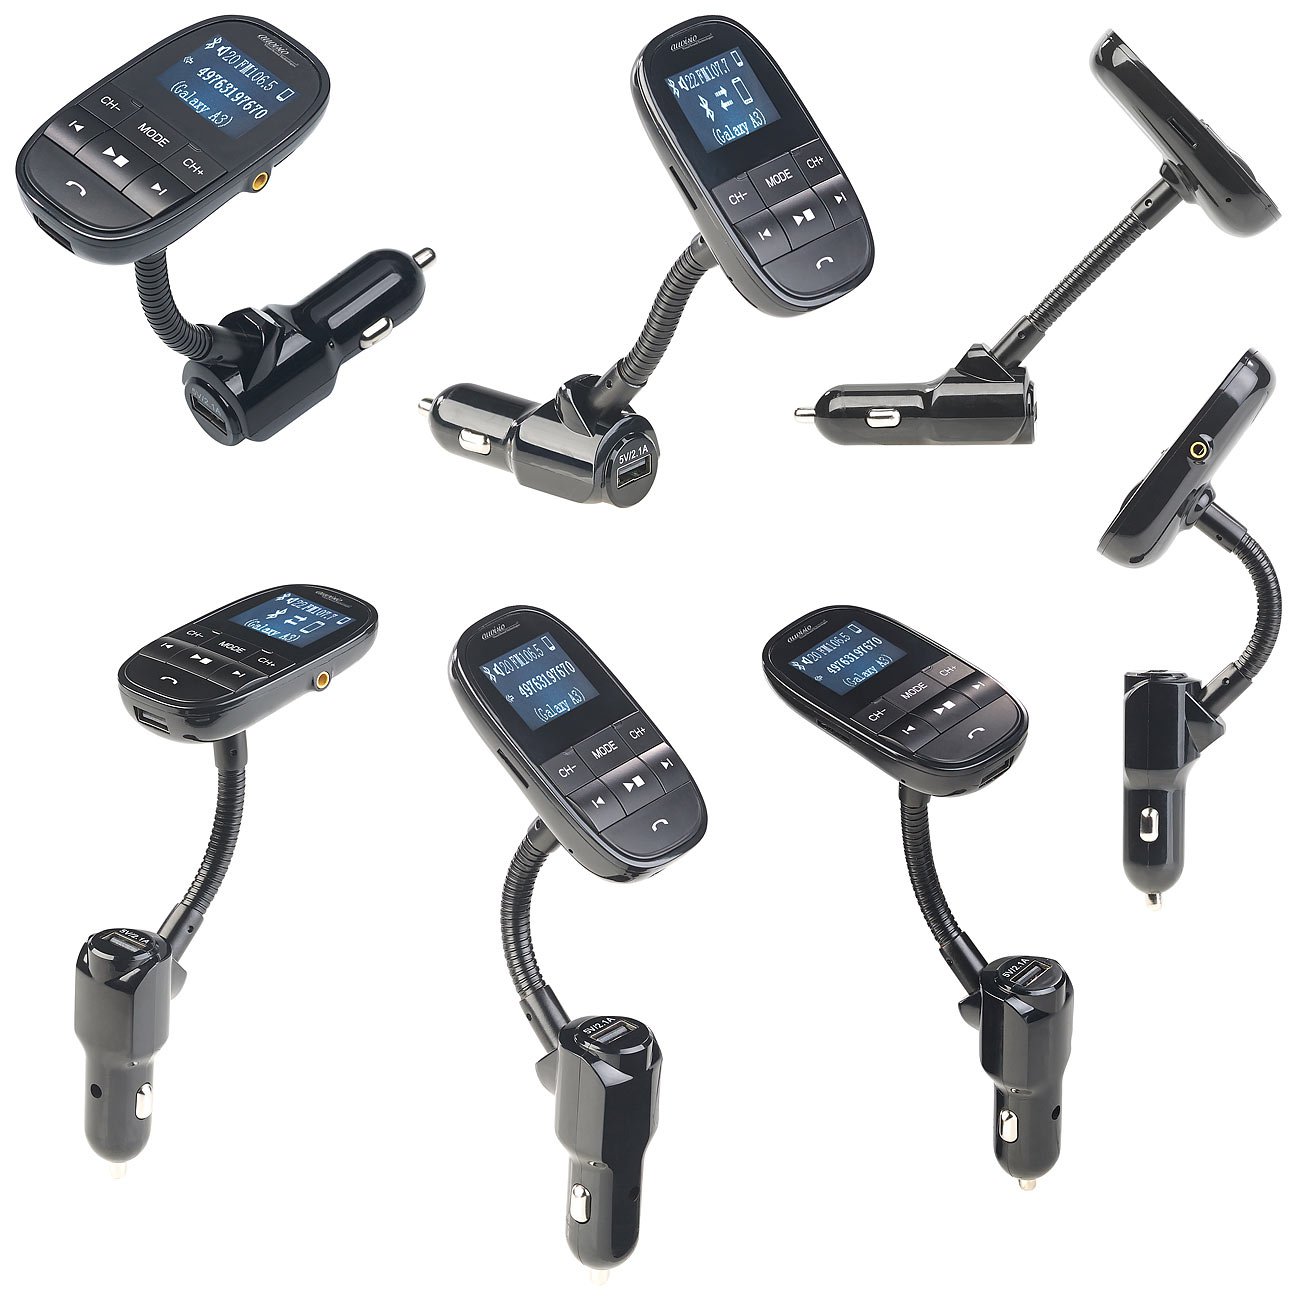 Linking Up: A Step-by-Step Guide On How To Connect A FM Transmitter